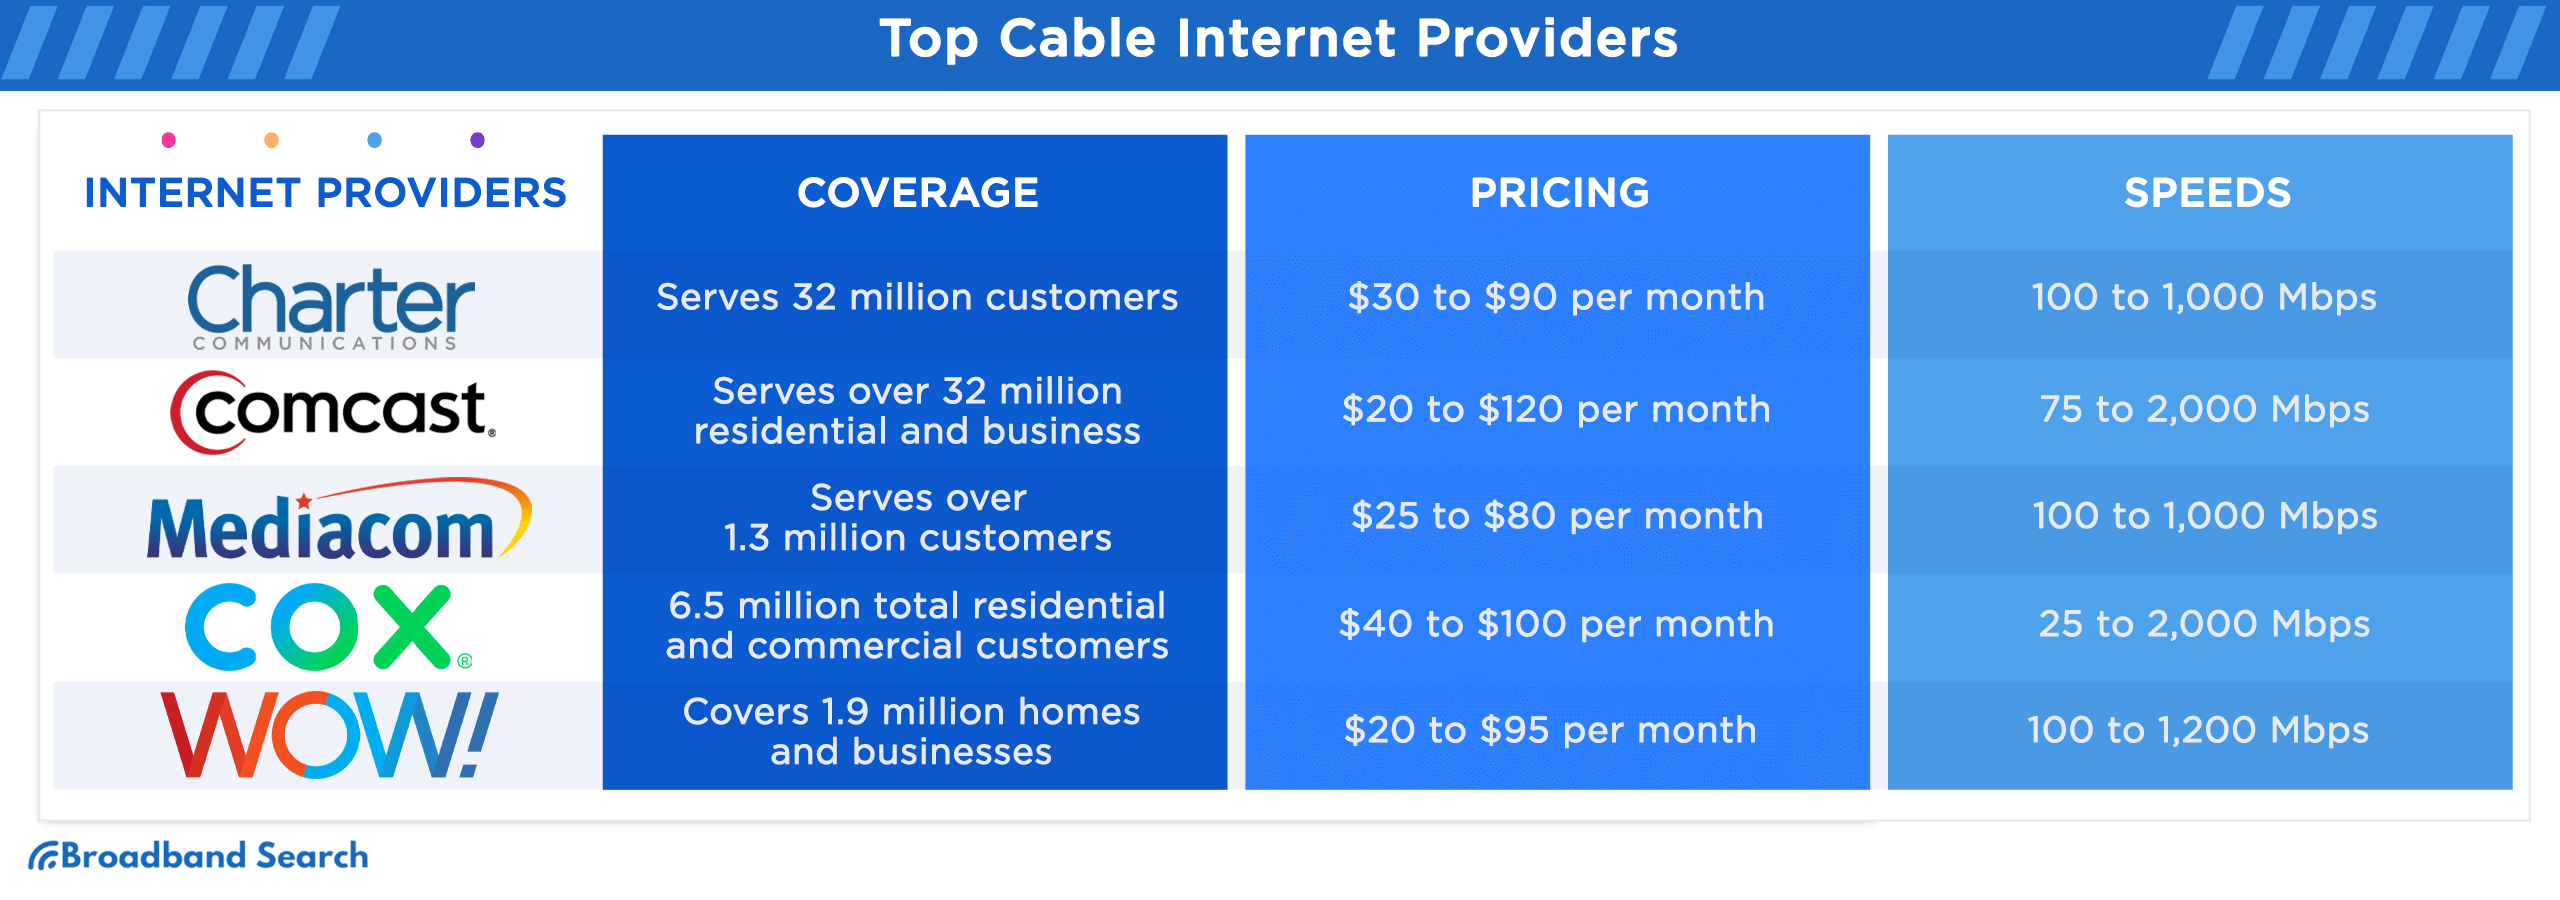 Top cable internet providers